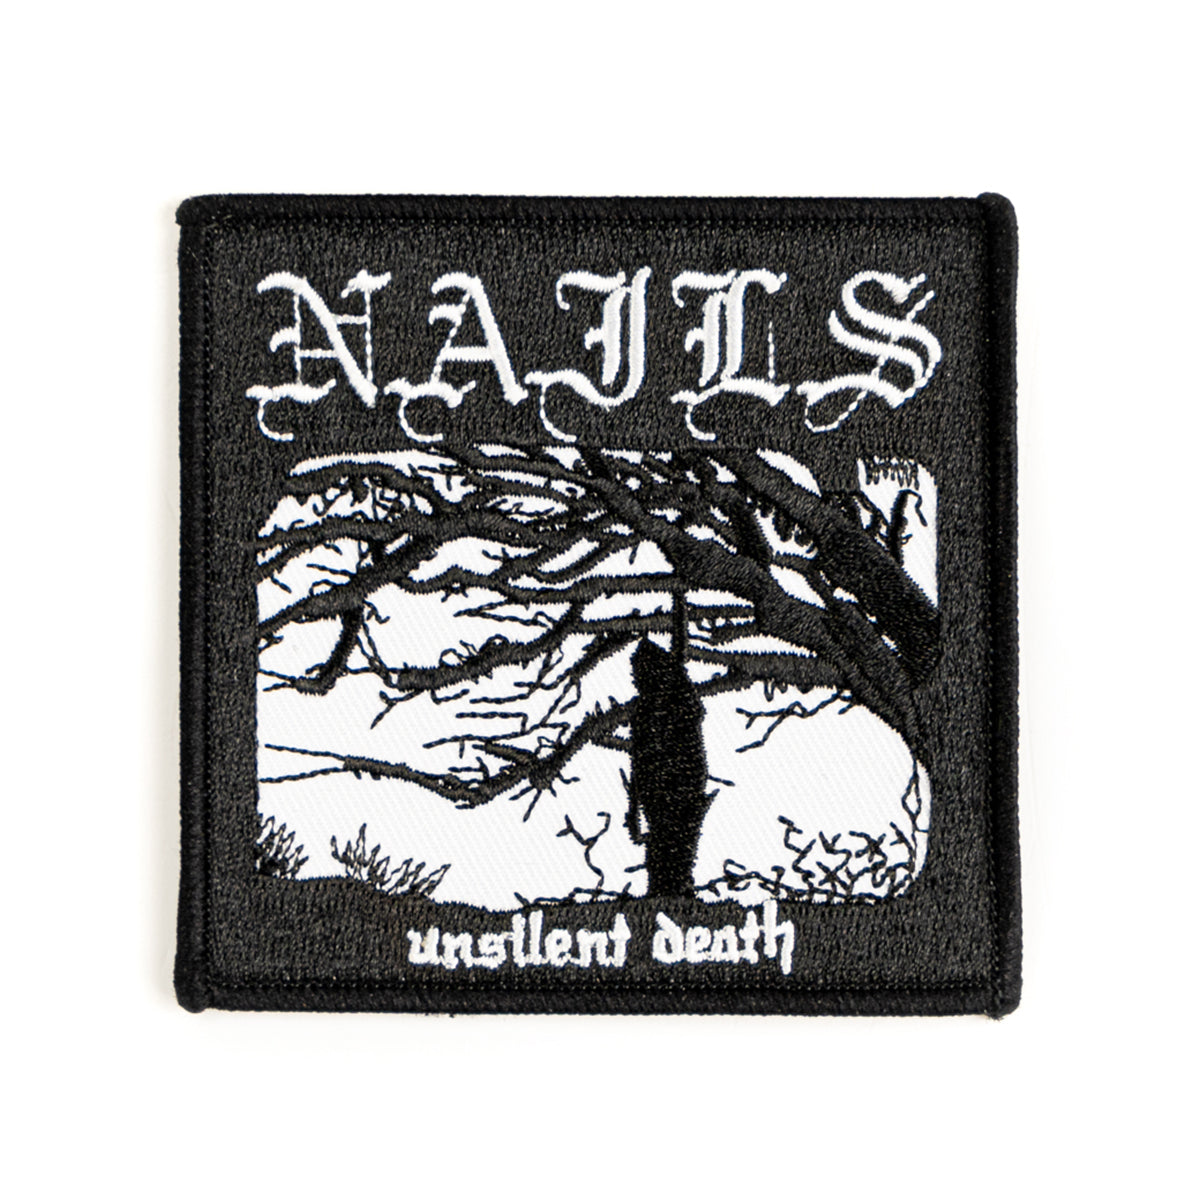 NAILS "Unsilent Death" Embroidered Patch